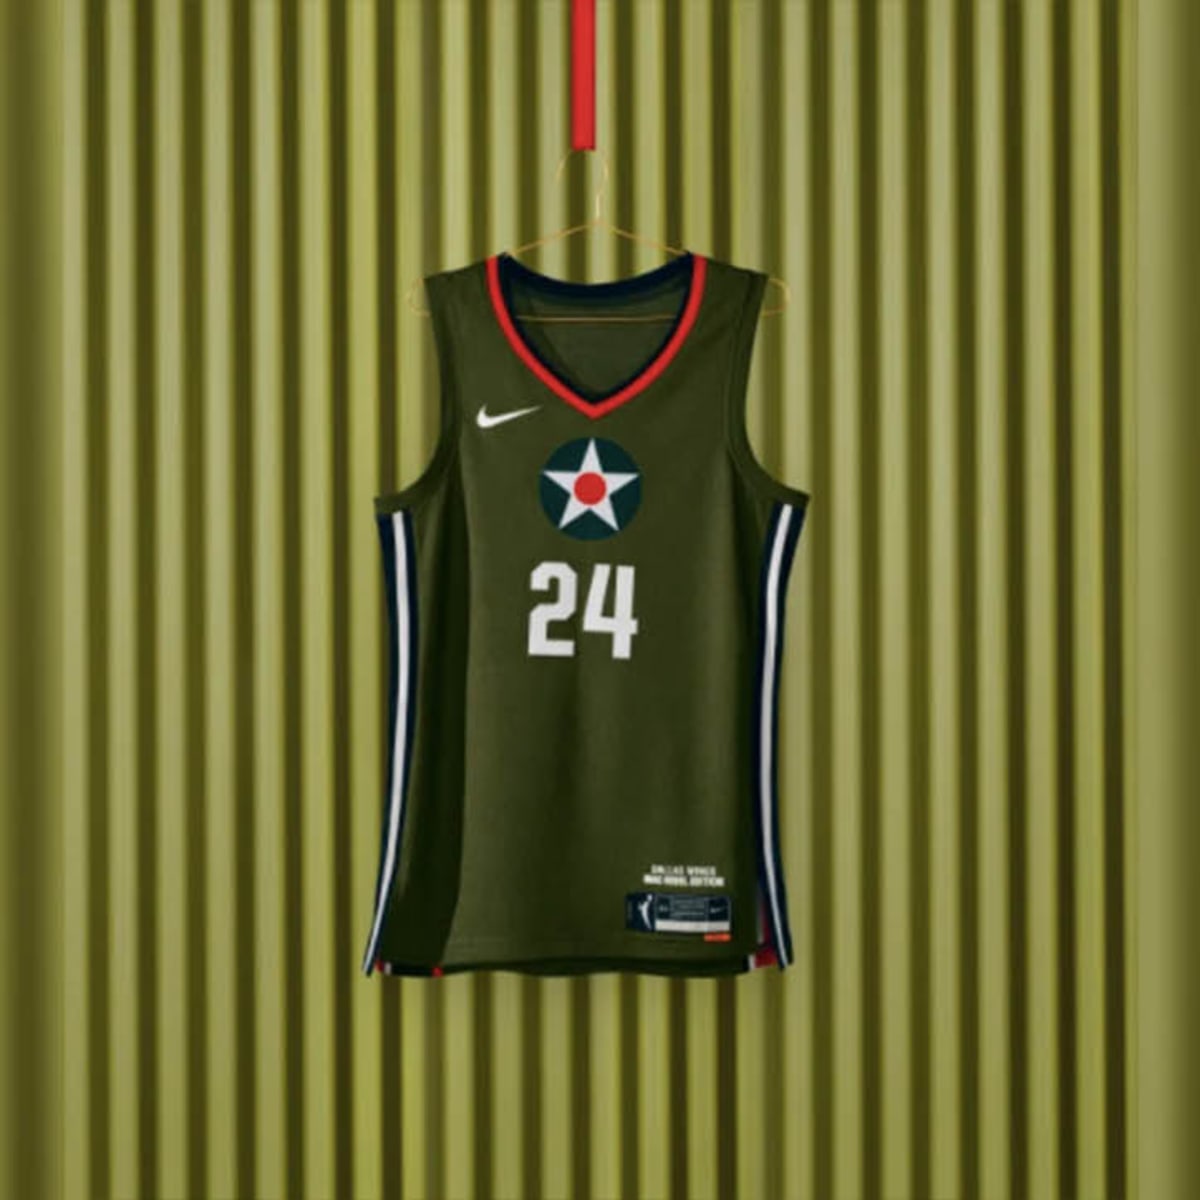 WNBA Rebel, Explorer Edition jerseys, t-shirts and jackets are officially  for sale at Nike